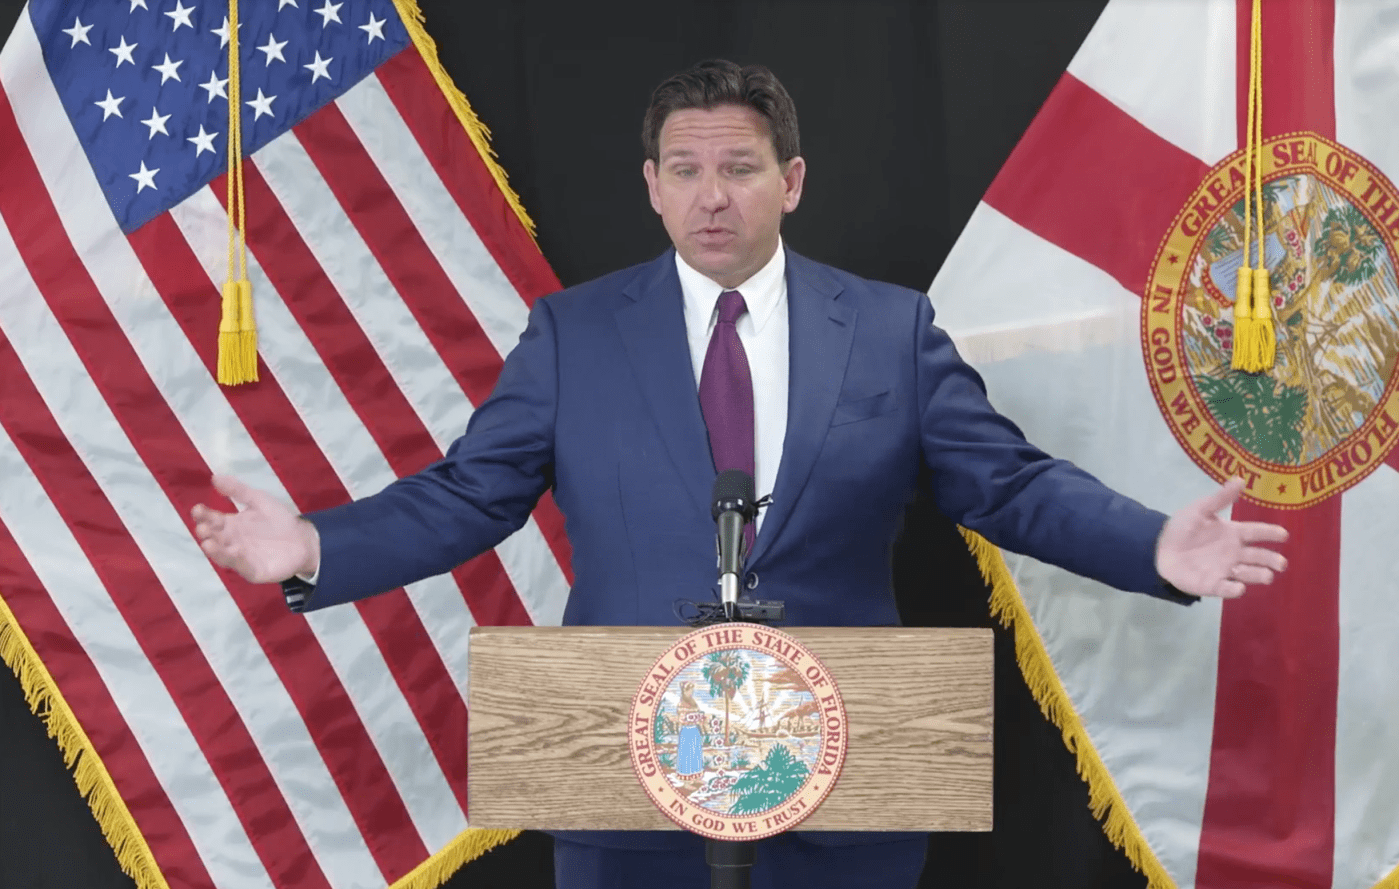 Ron DeSantis signs bill requiring parental consent for kids to join social media platforms in Florida